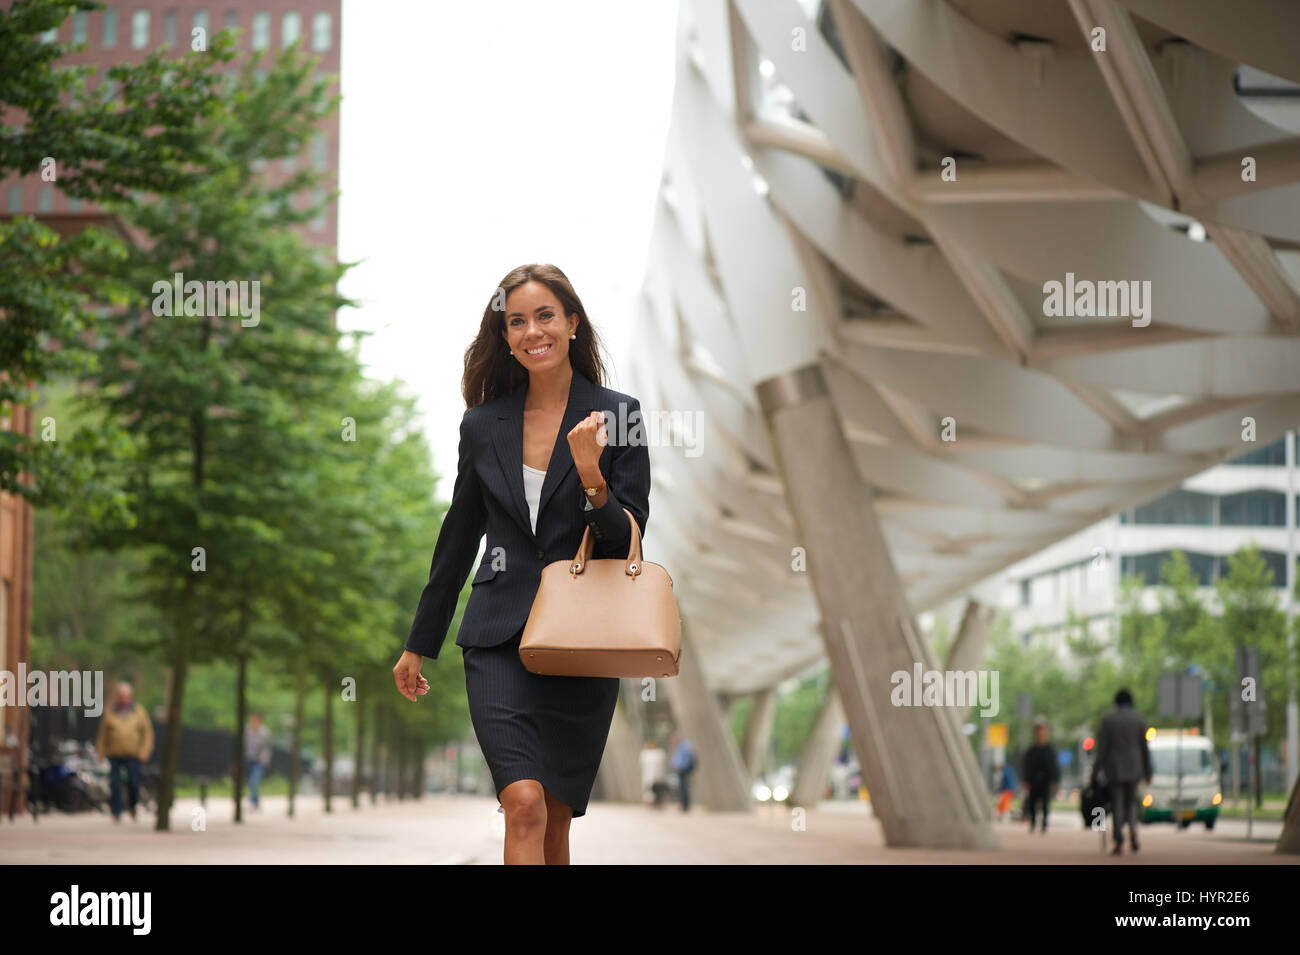 Portrait of a business woman with handbag walking in the city Stock Photo